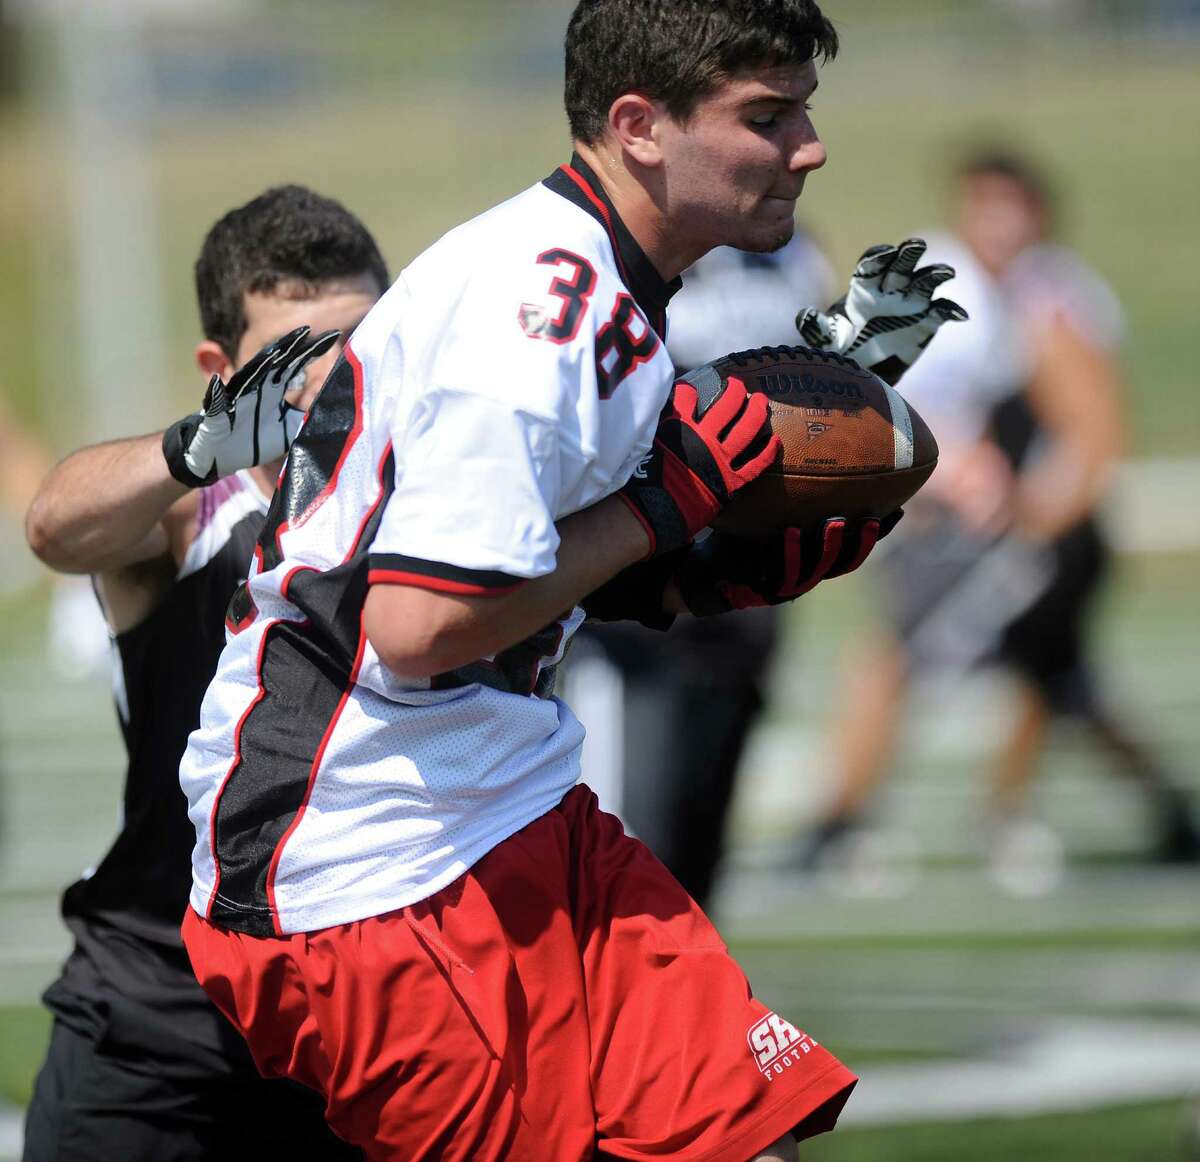 TJ Gallagher of Fairfield Warde High School participates in the 5th annual Connecticut Grip It and Rip It Passing Camp at New Canaan High School on Saturday, July 14, 2012.